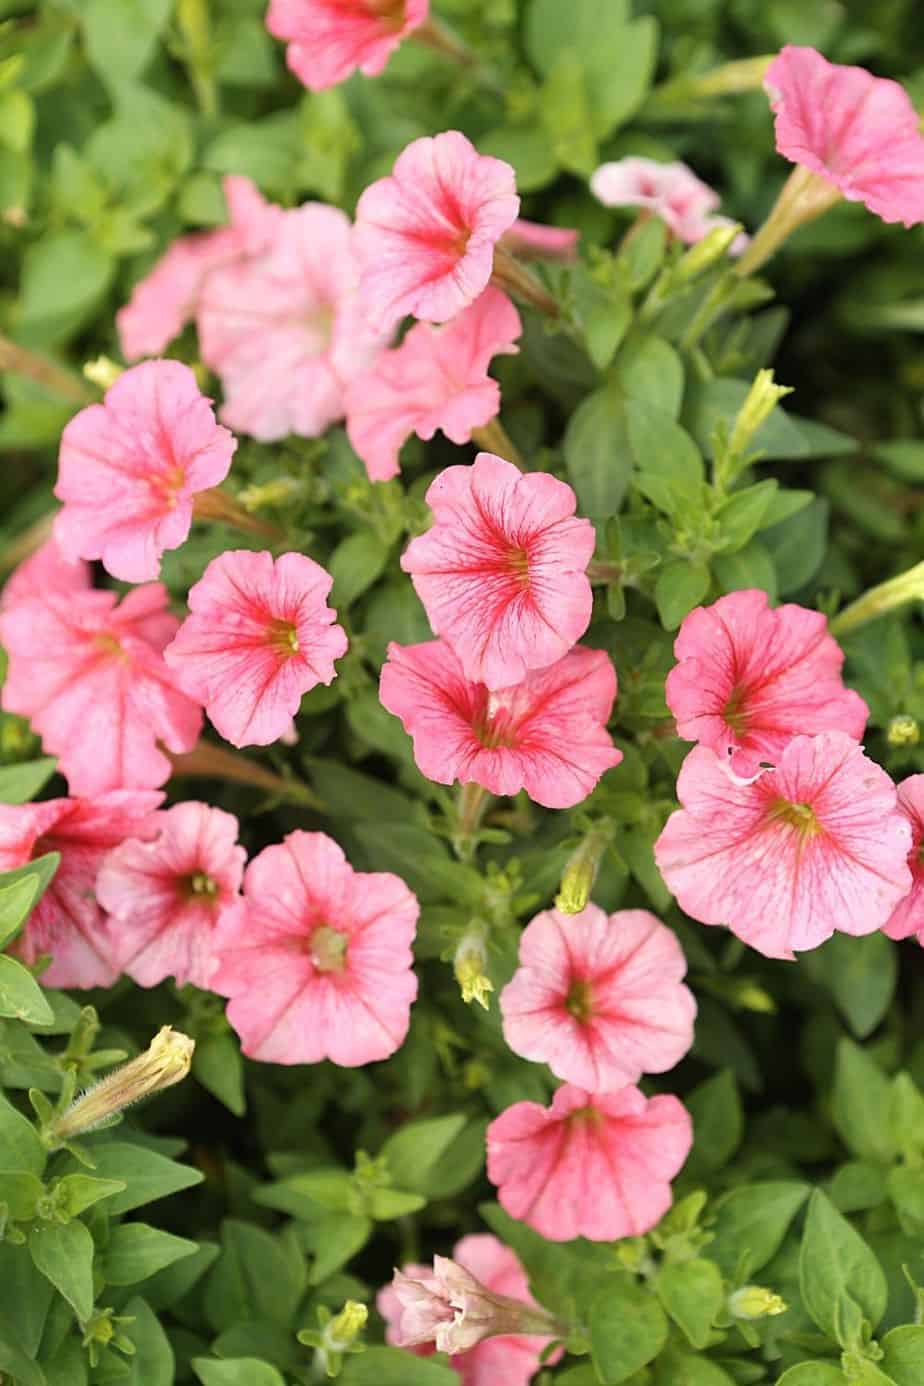 Petunia is a stunning yet low-maintenance plant that you can grow on an east-facing balcony